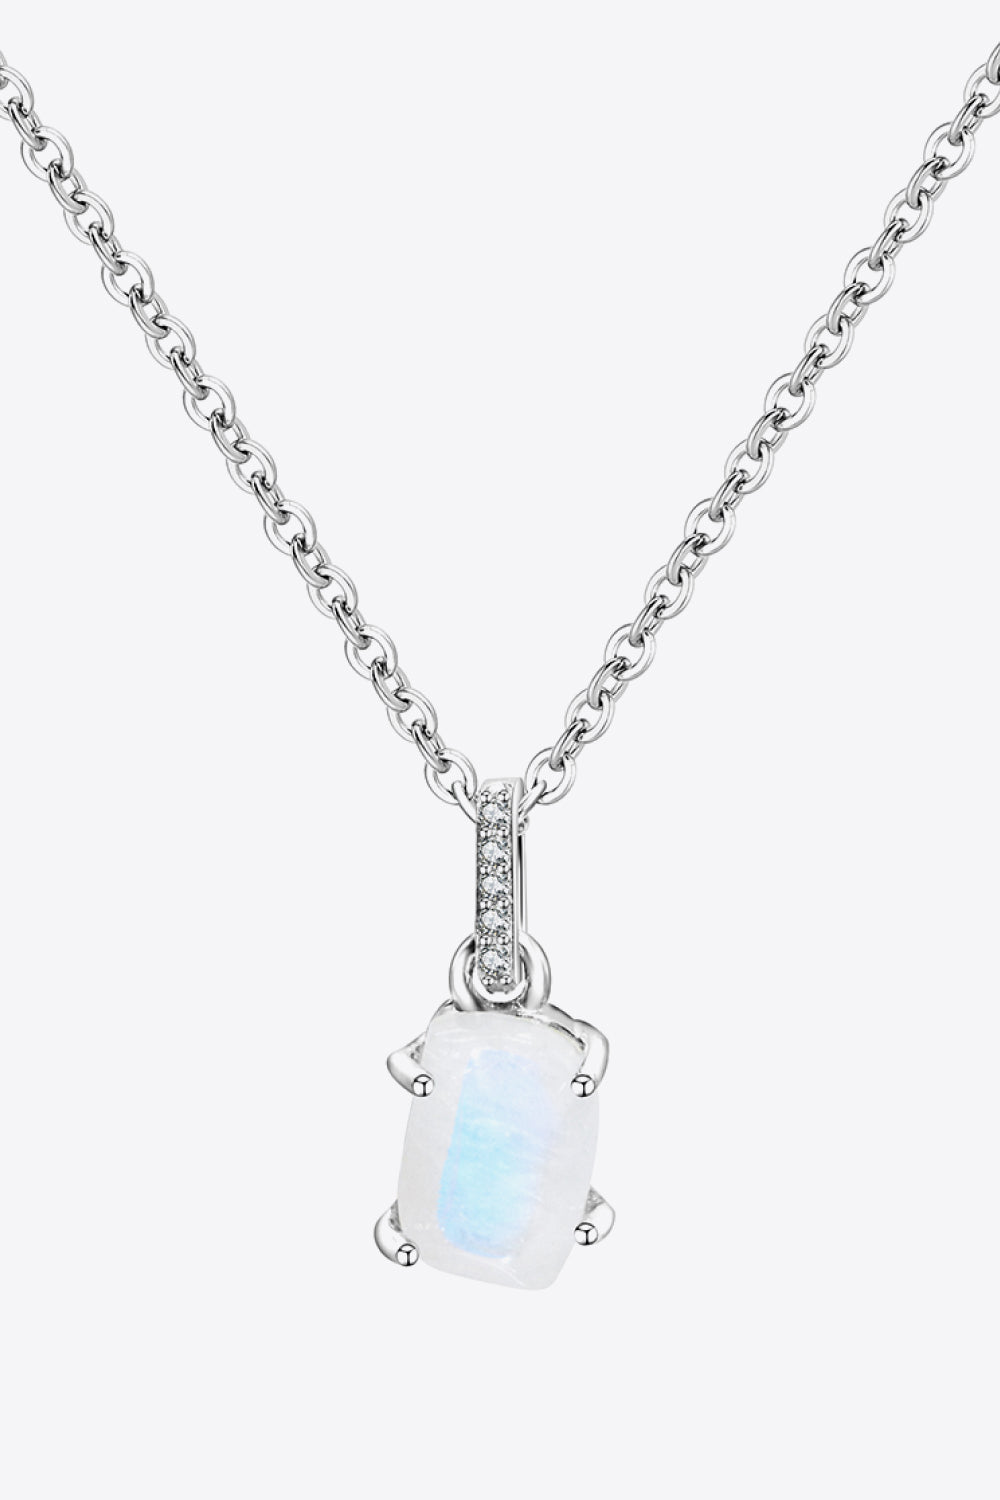 Natural Moonstone 4-Prong Pendant Necklace - Necklaces - FITGGINS